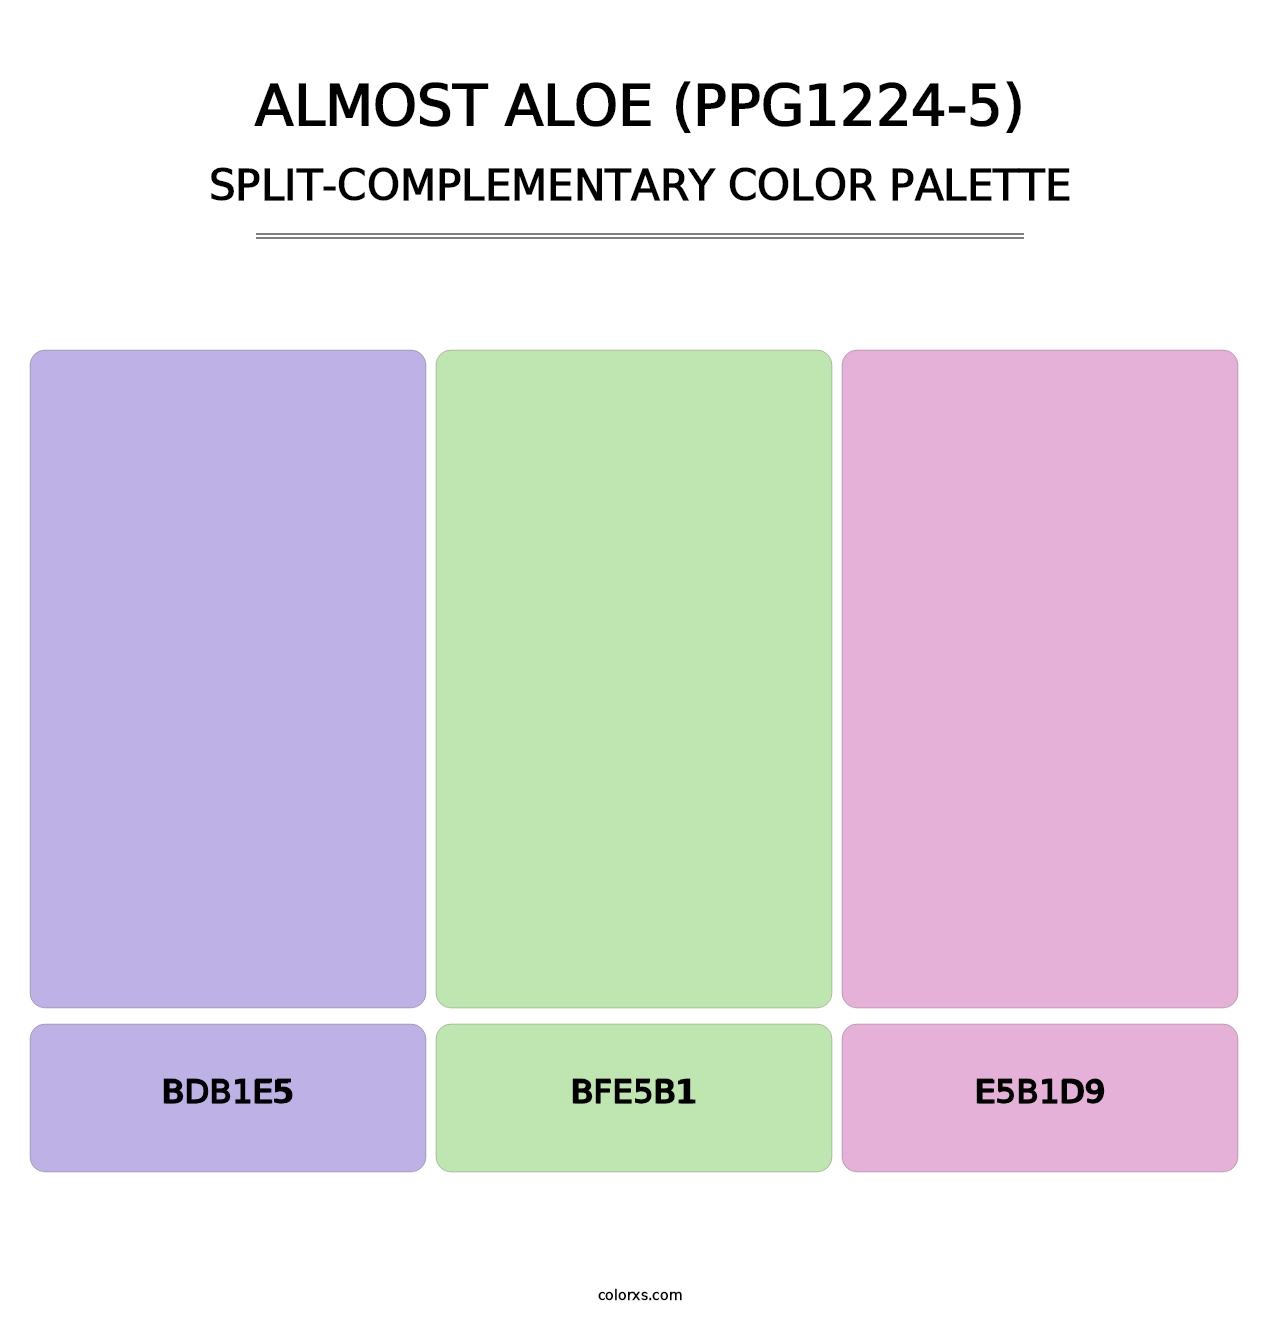 Almost Aloe (PPG1224-5) - Split-Complementary Color Palette